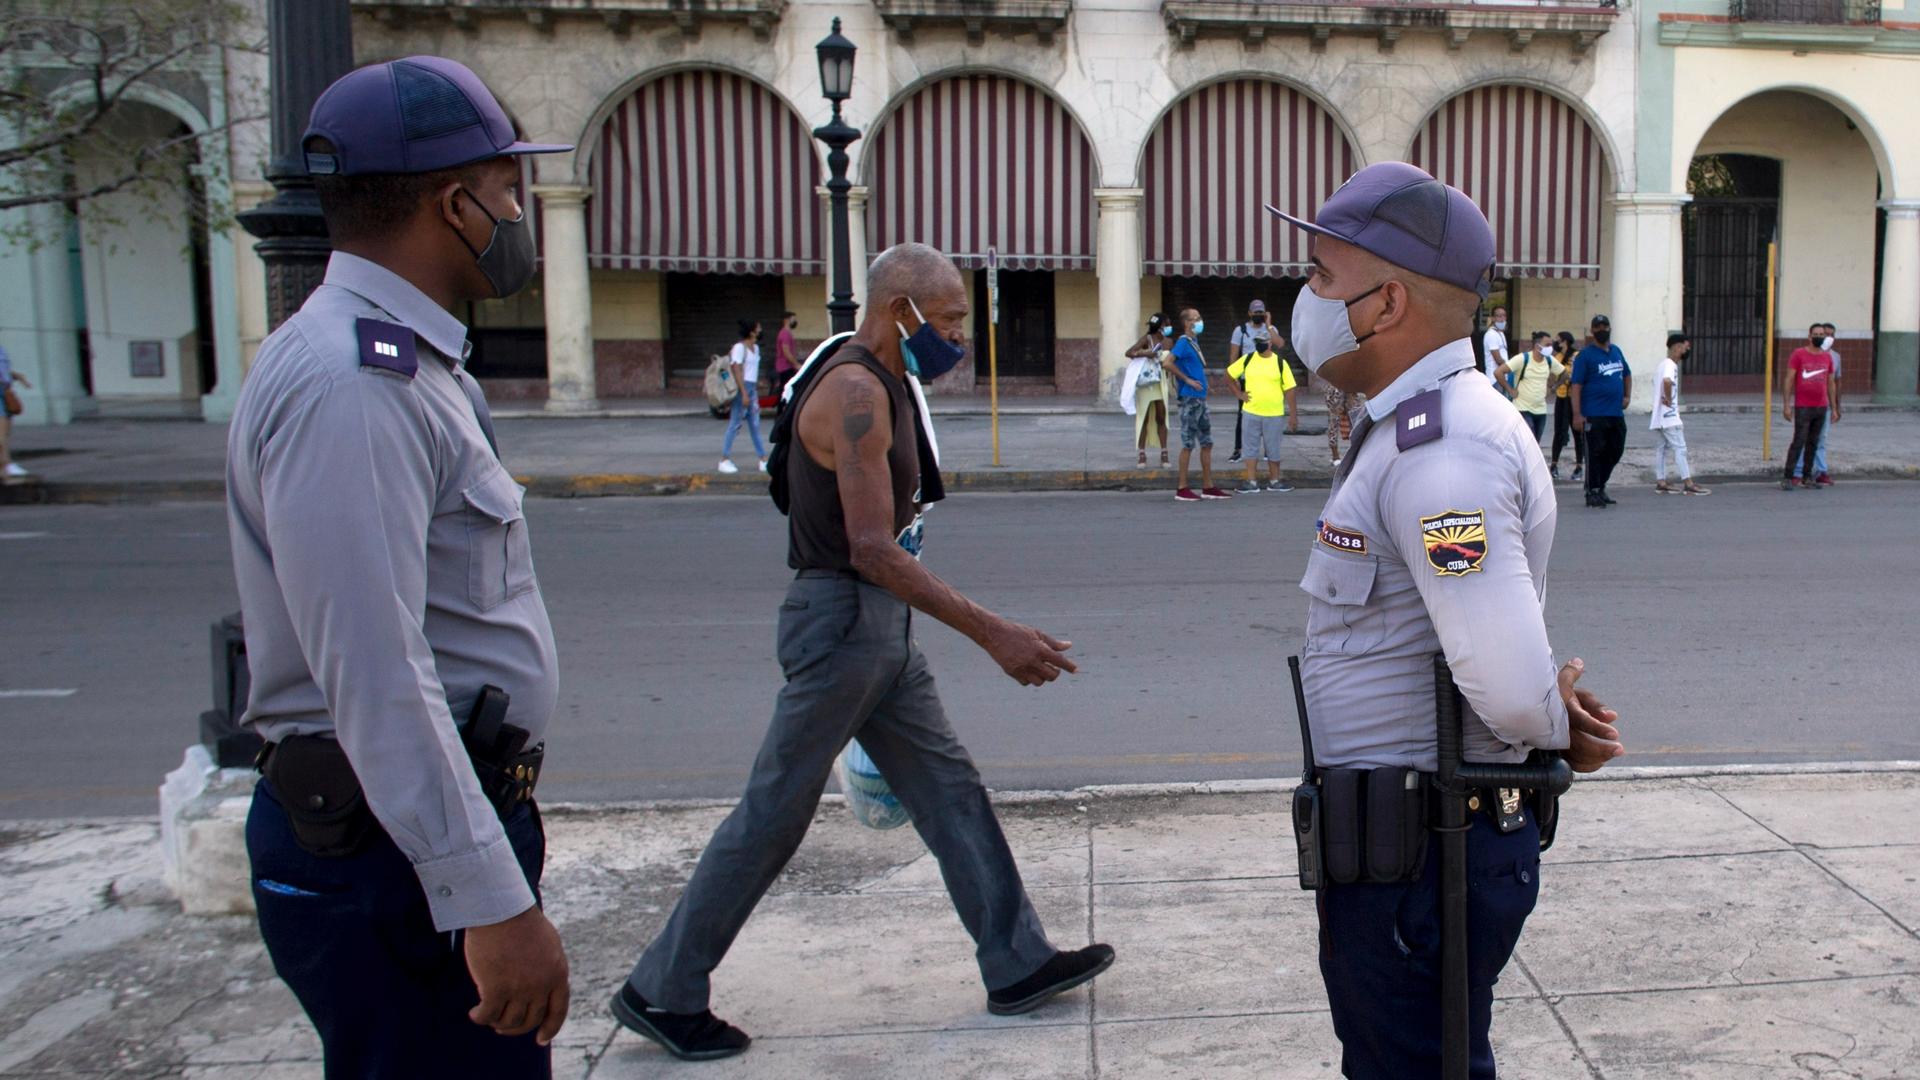 Police stand guard near the National Capitol building in Havana, Cuba, July 12, 2021, the day after protests against food shortages and high prices amid the coronavirus crisis.